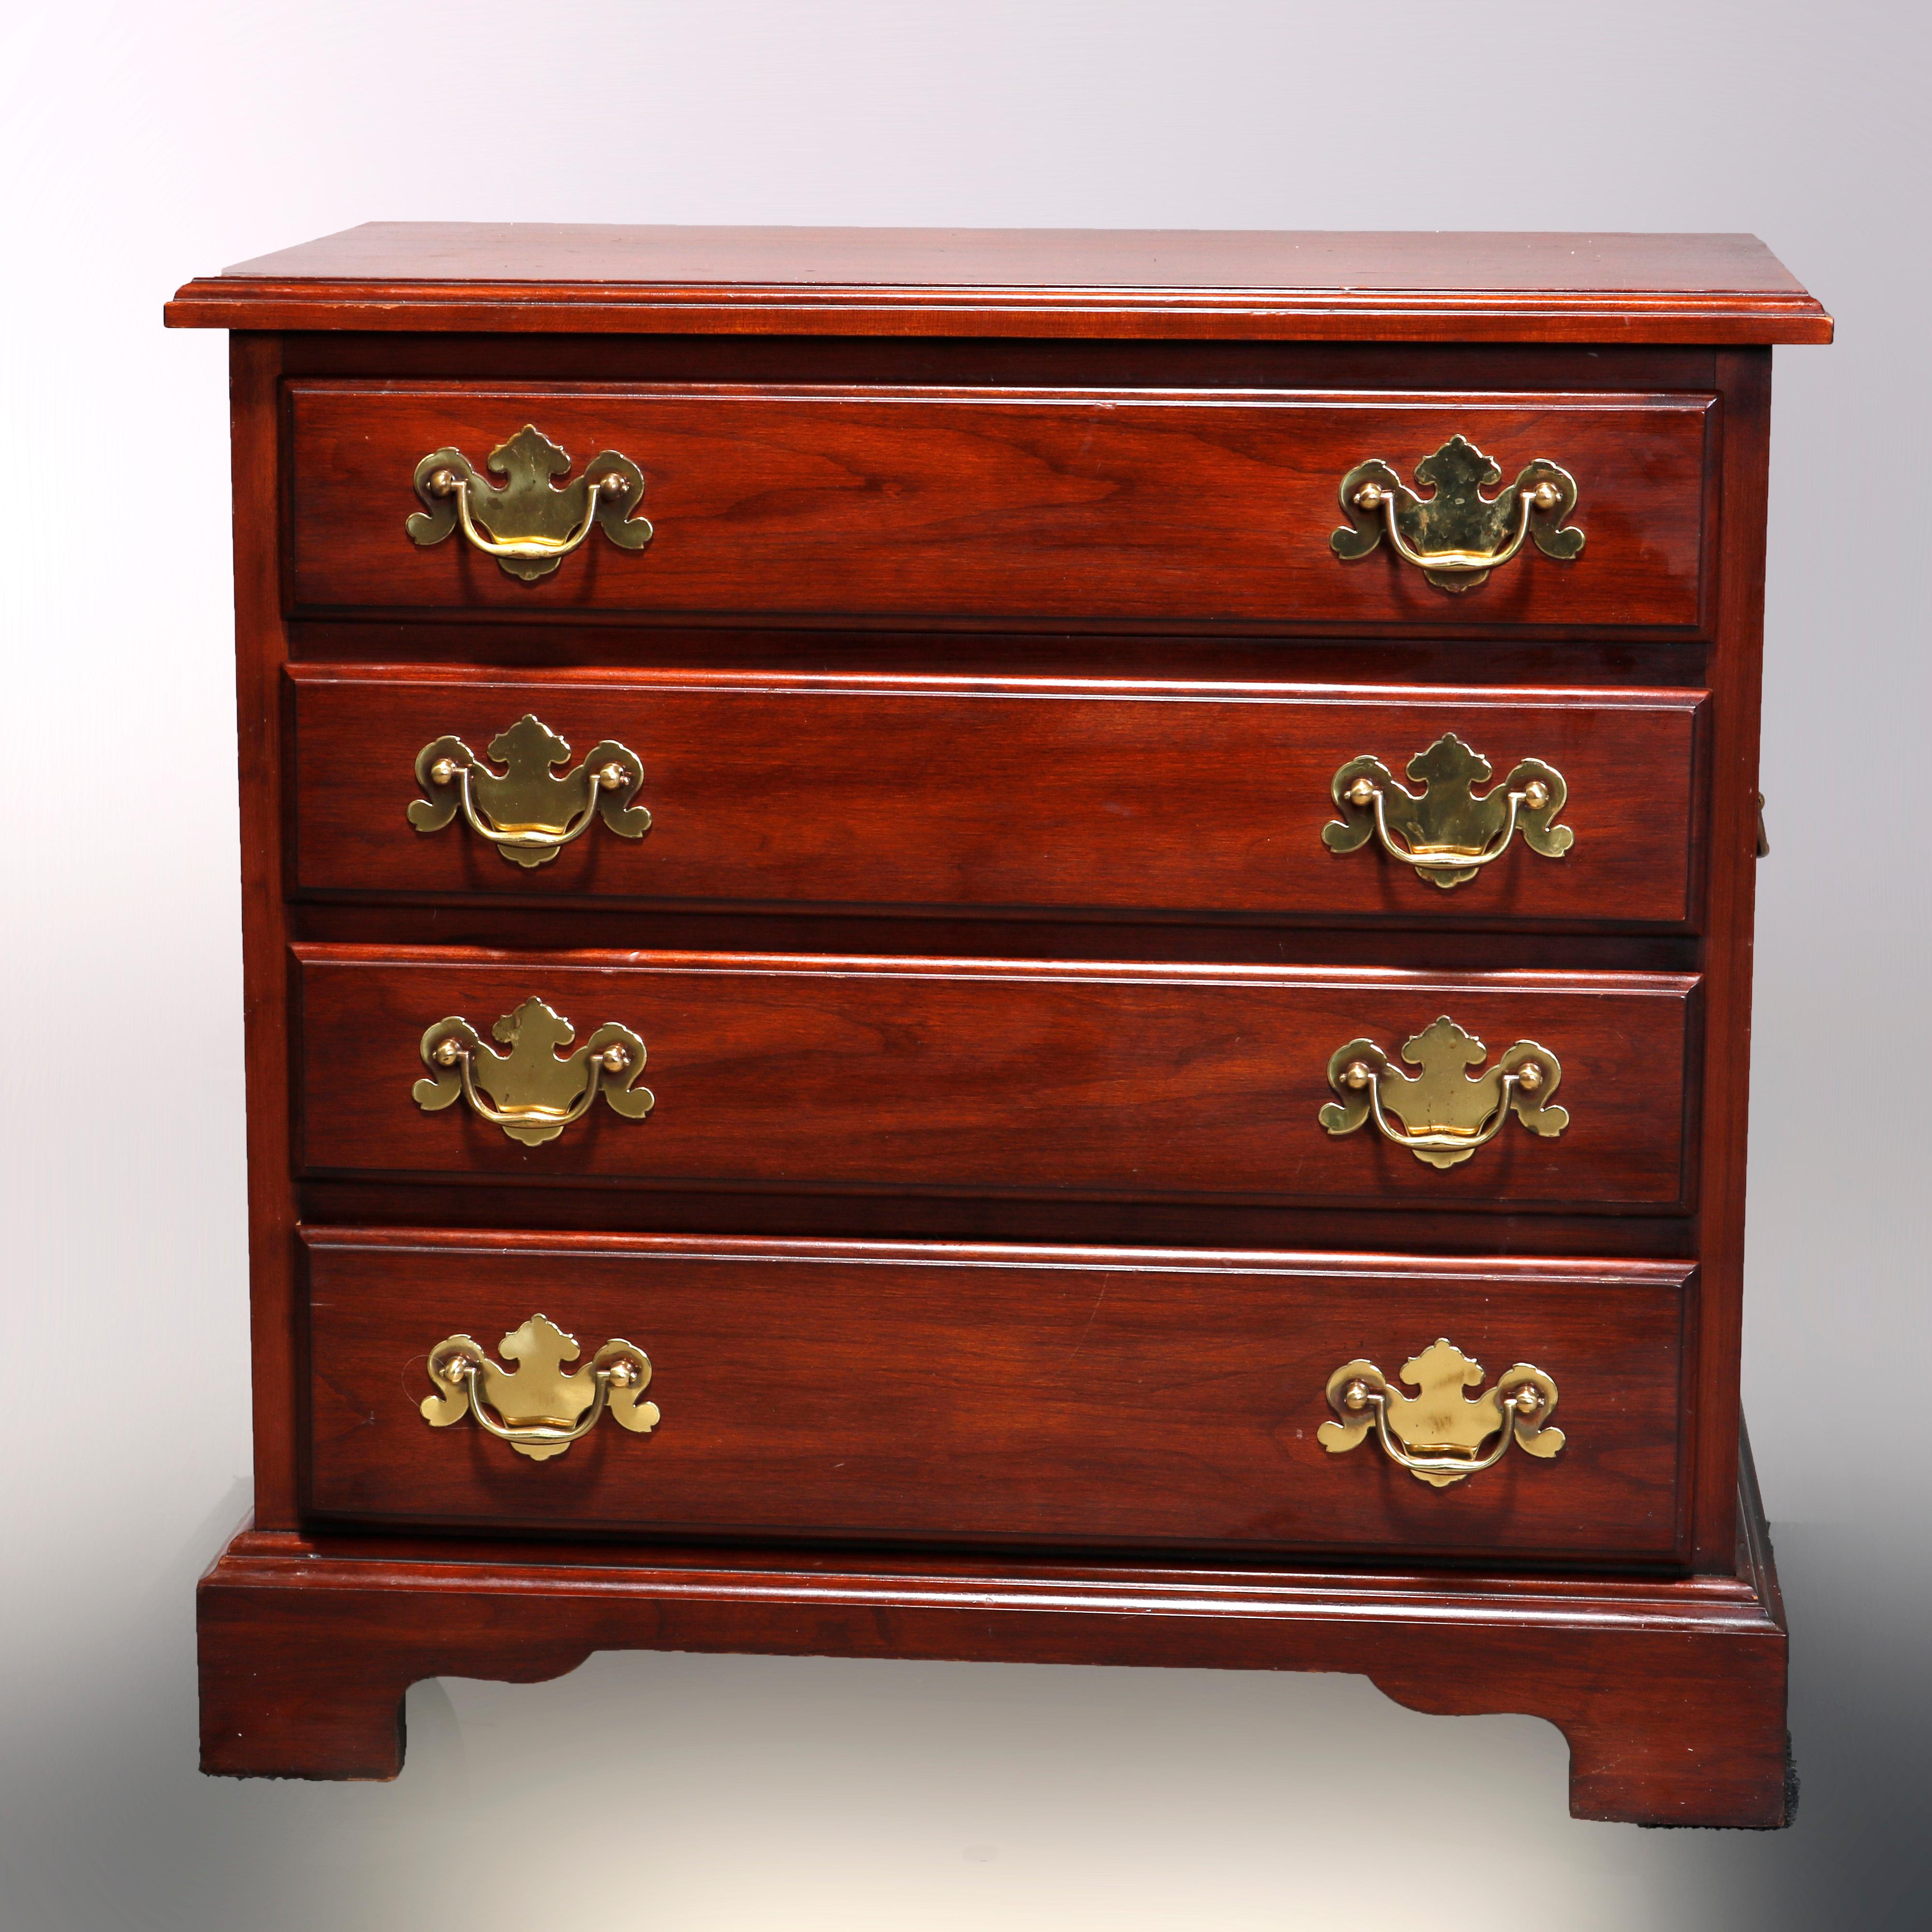 A vintage Chippendale style silver chest by Henkel Harris in the Virginia Galleries line offers black cherry construction with beveled top surmounting case with four graduated drawers and raised on bracket feet, cast brass pulls and handles on